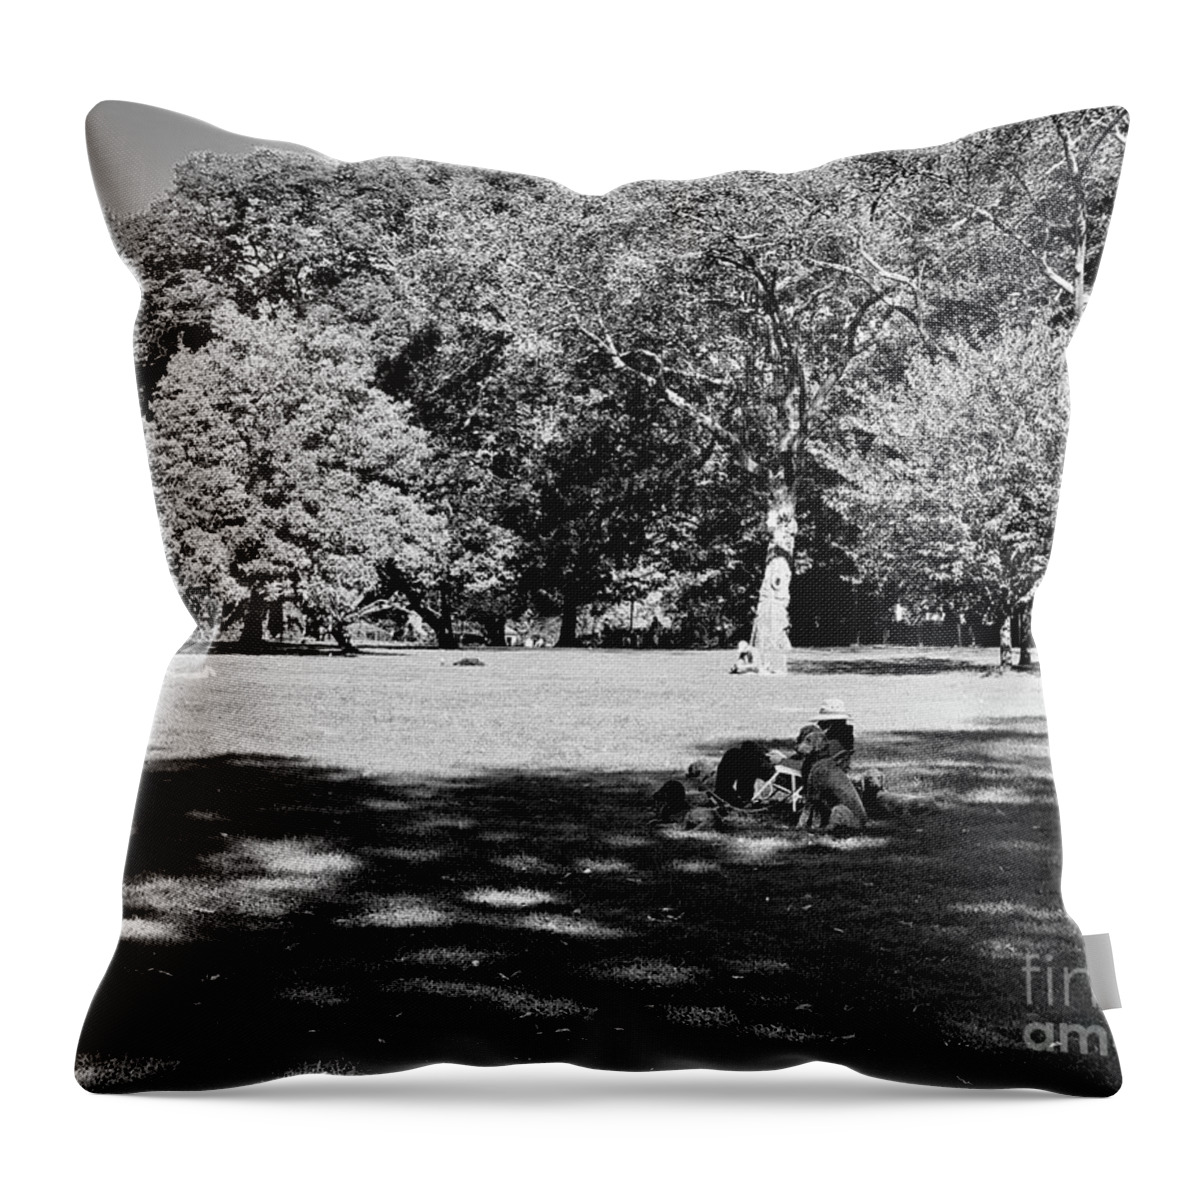  Throw Pillow featuring the photograph Relax by Dennis Richardson